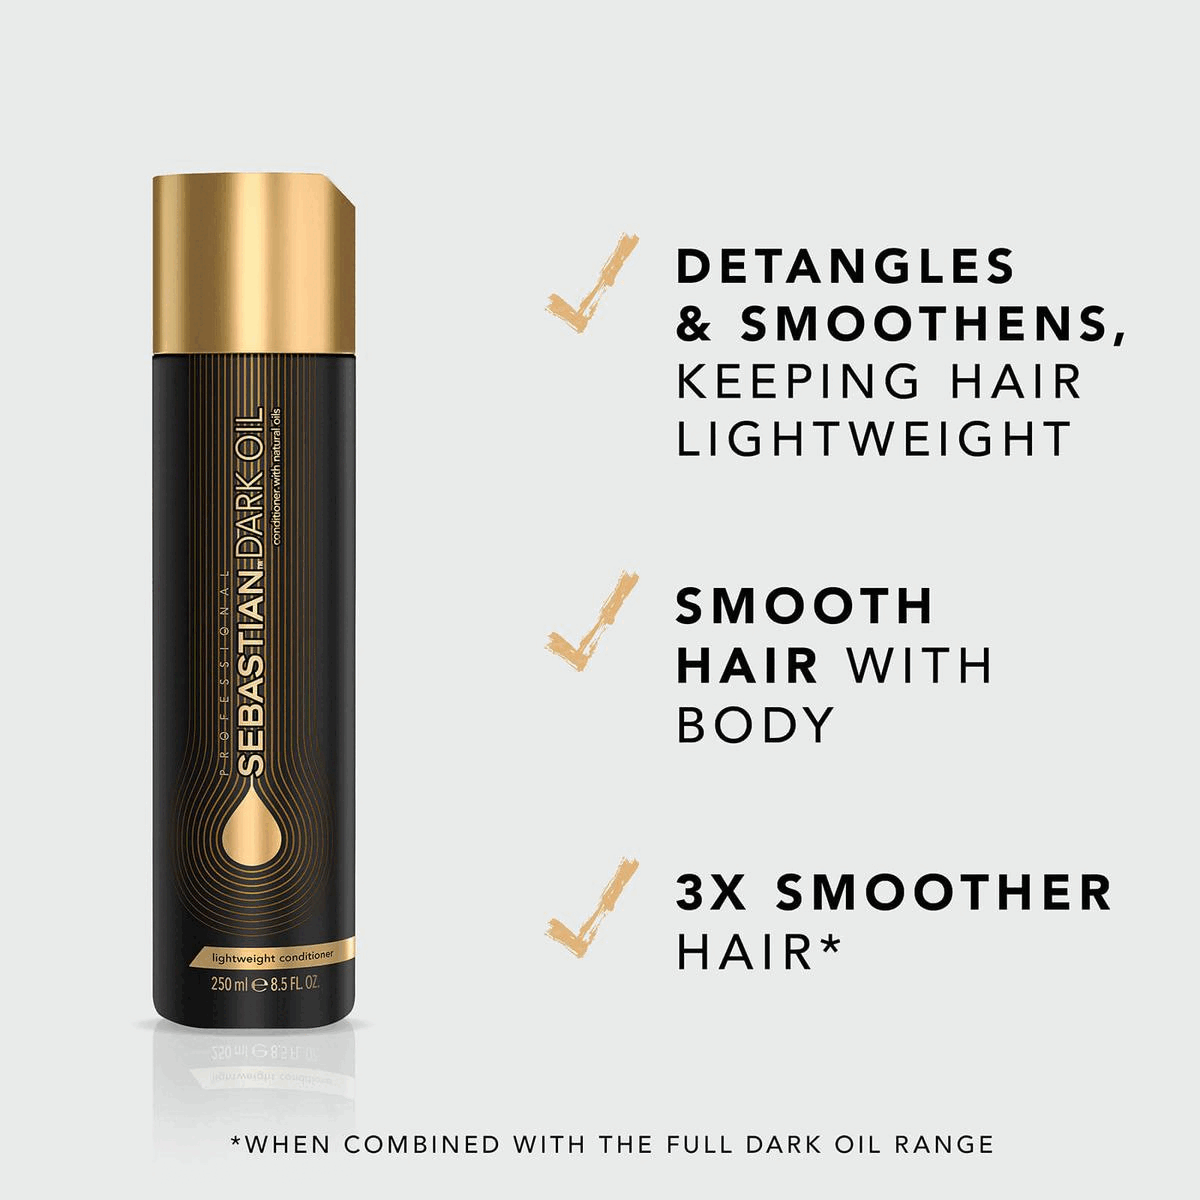 Detangles & smoothens, keeping hair lightweight Smooth hair with body n3x smoother hair* *when combined with the dark oil range. How to use Remove excess water Distribute through the hair Rinse thoroughly. Jojoba & argan oil